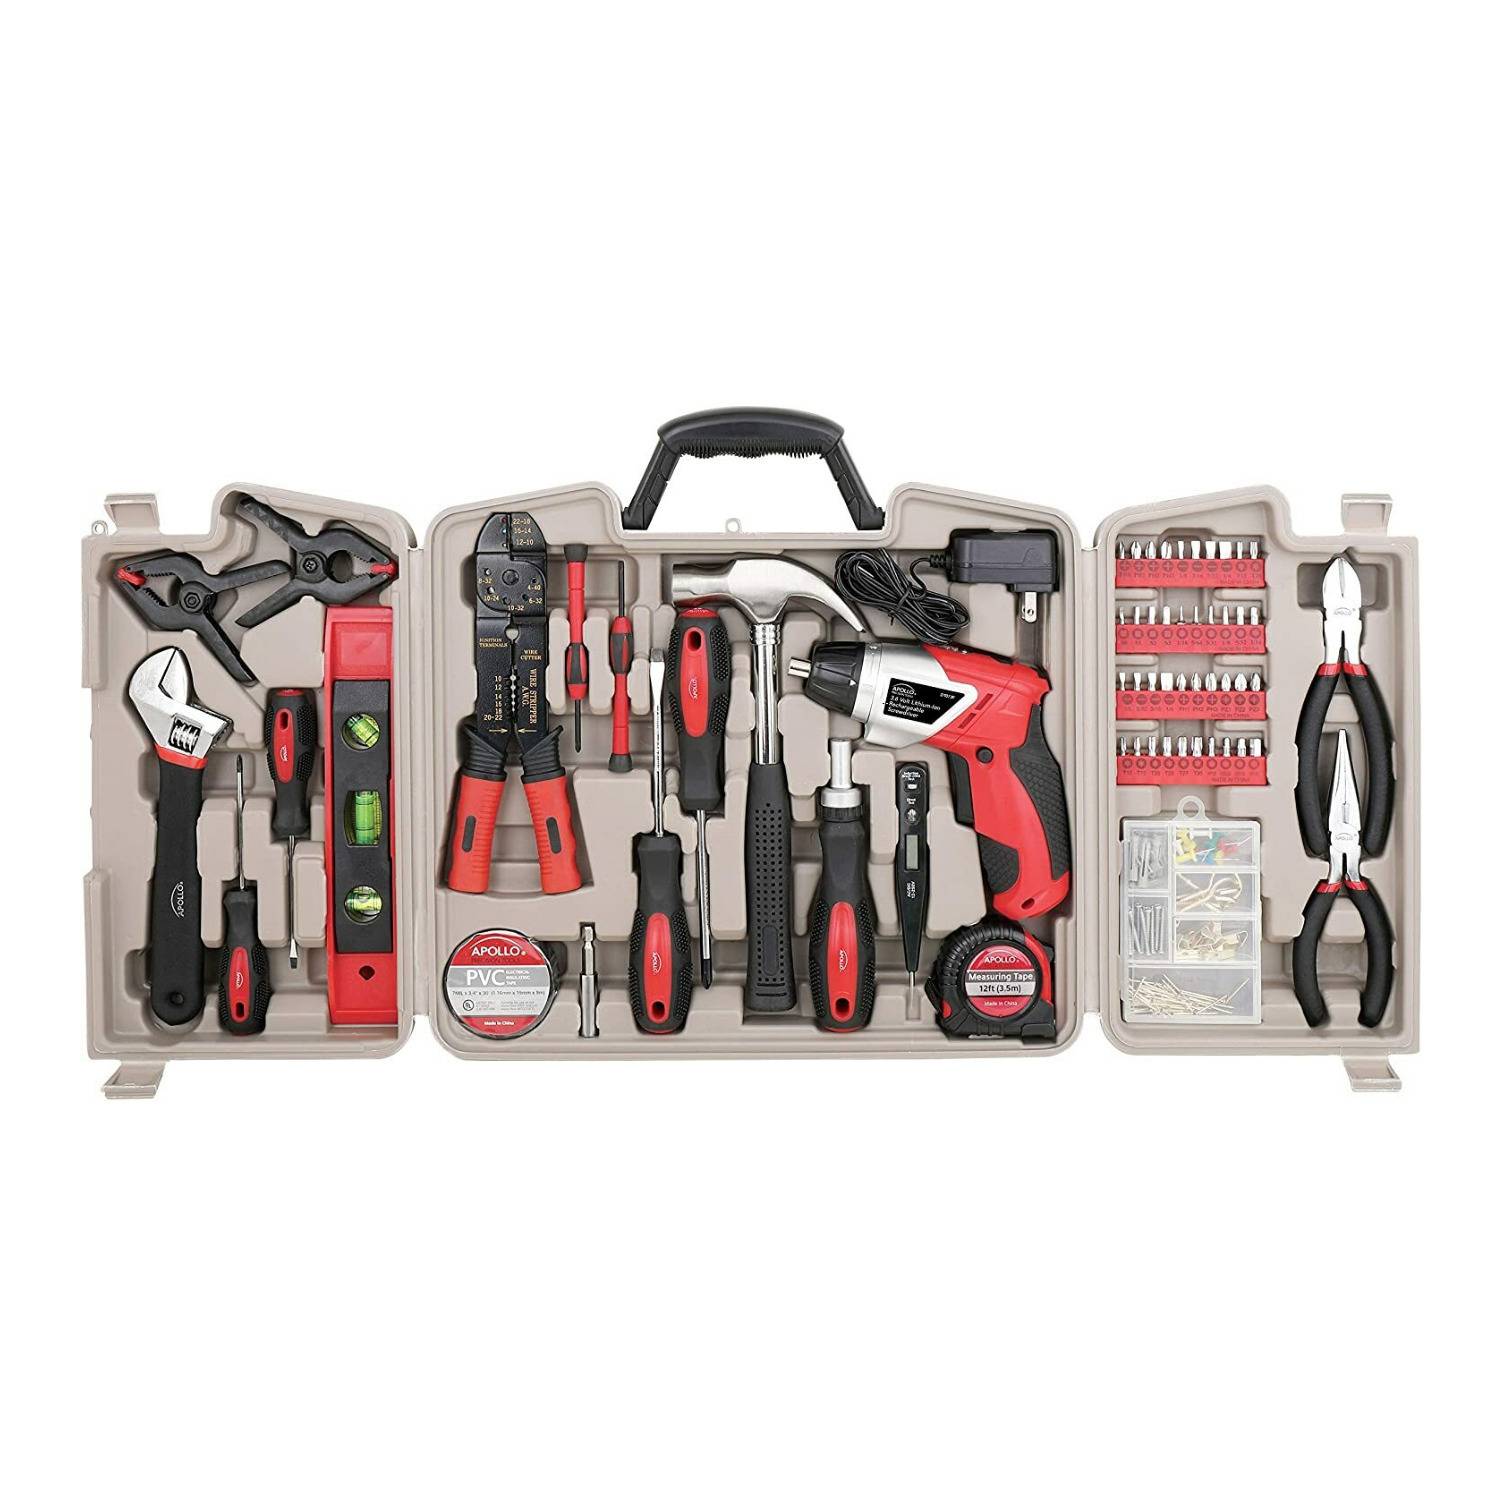 Apollo Tools 161-Piece Complete Household Tool Set with 3.6 Volt Lithium-Ion Cordless Screwdriver